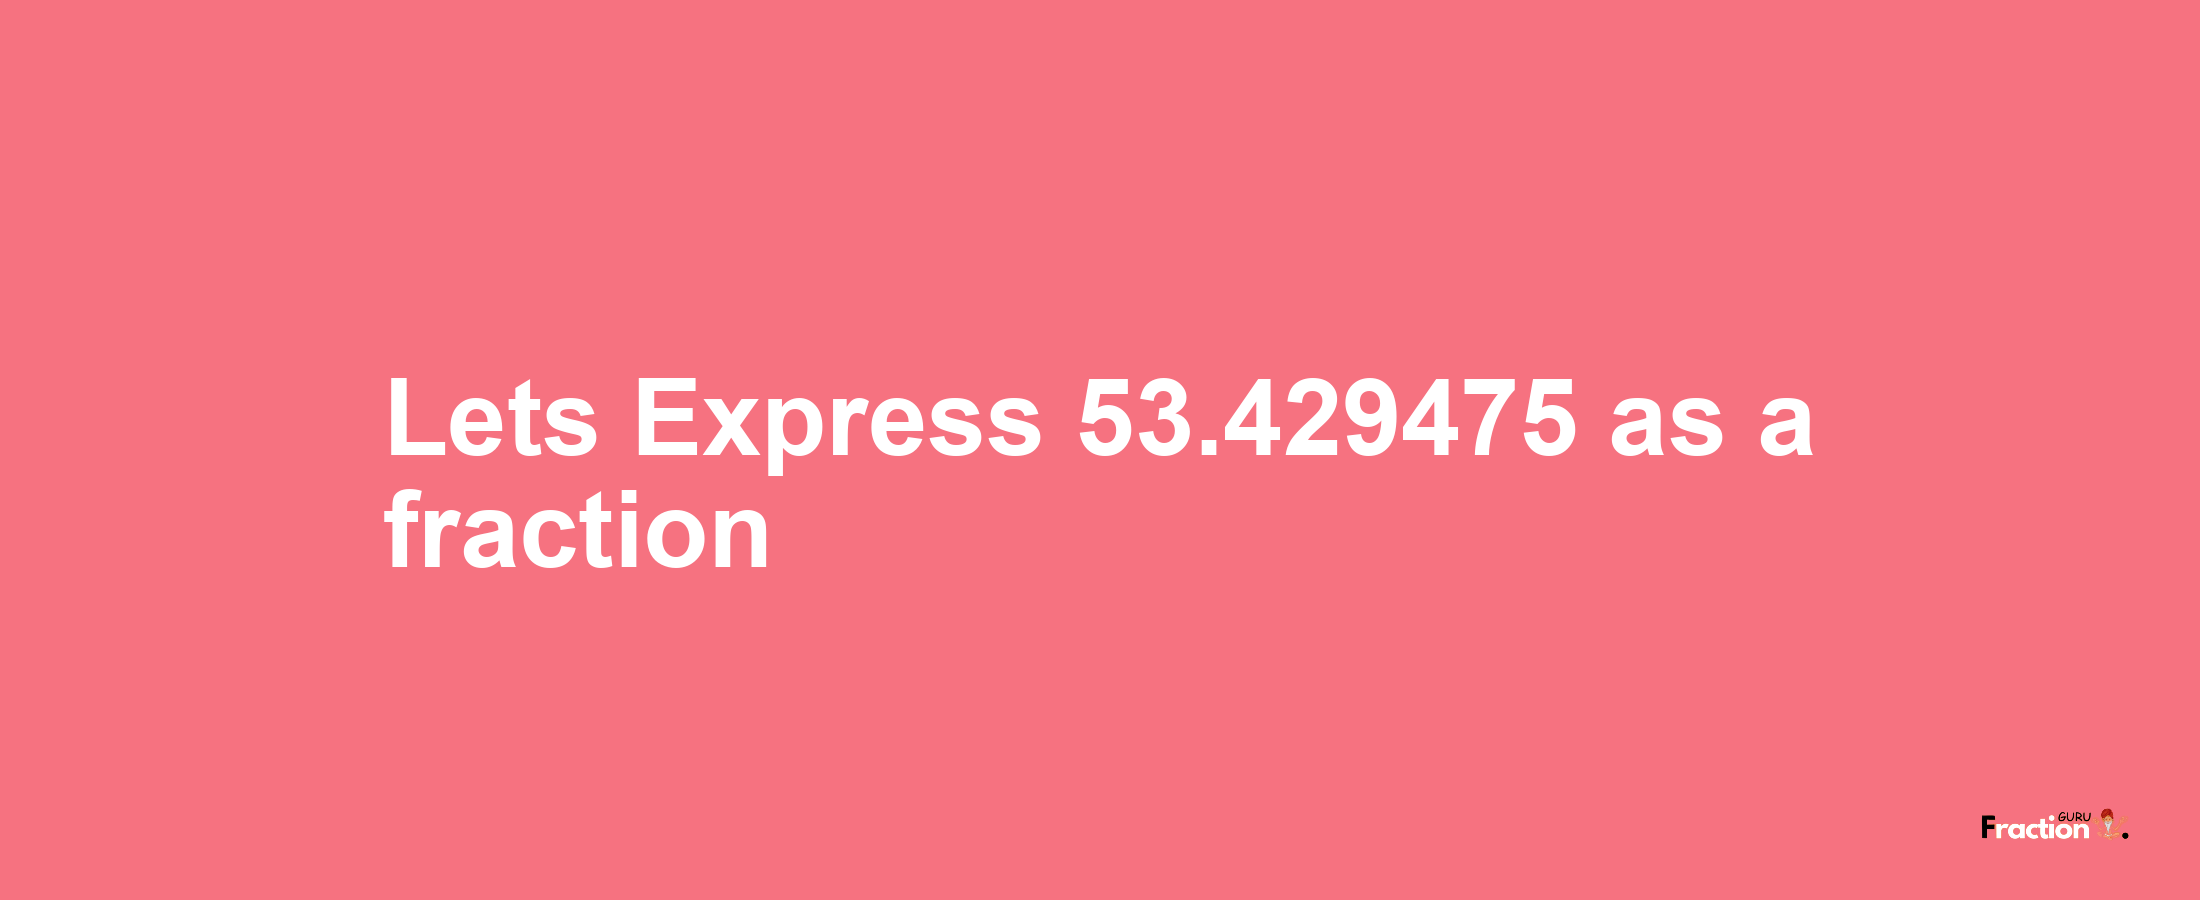 Lets Express 53.429475 as afraction